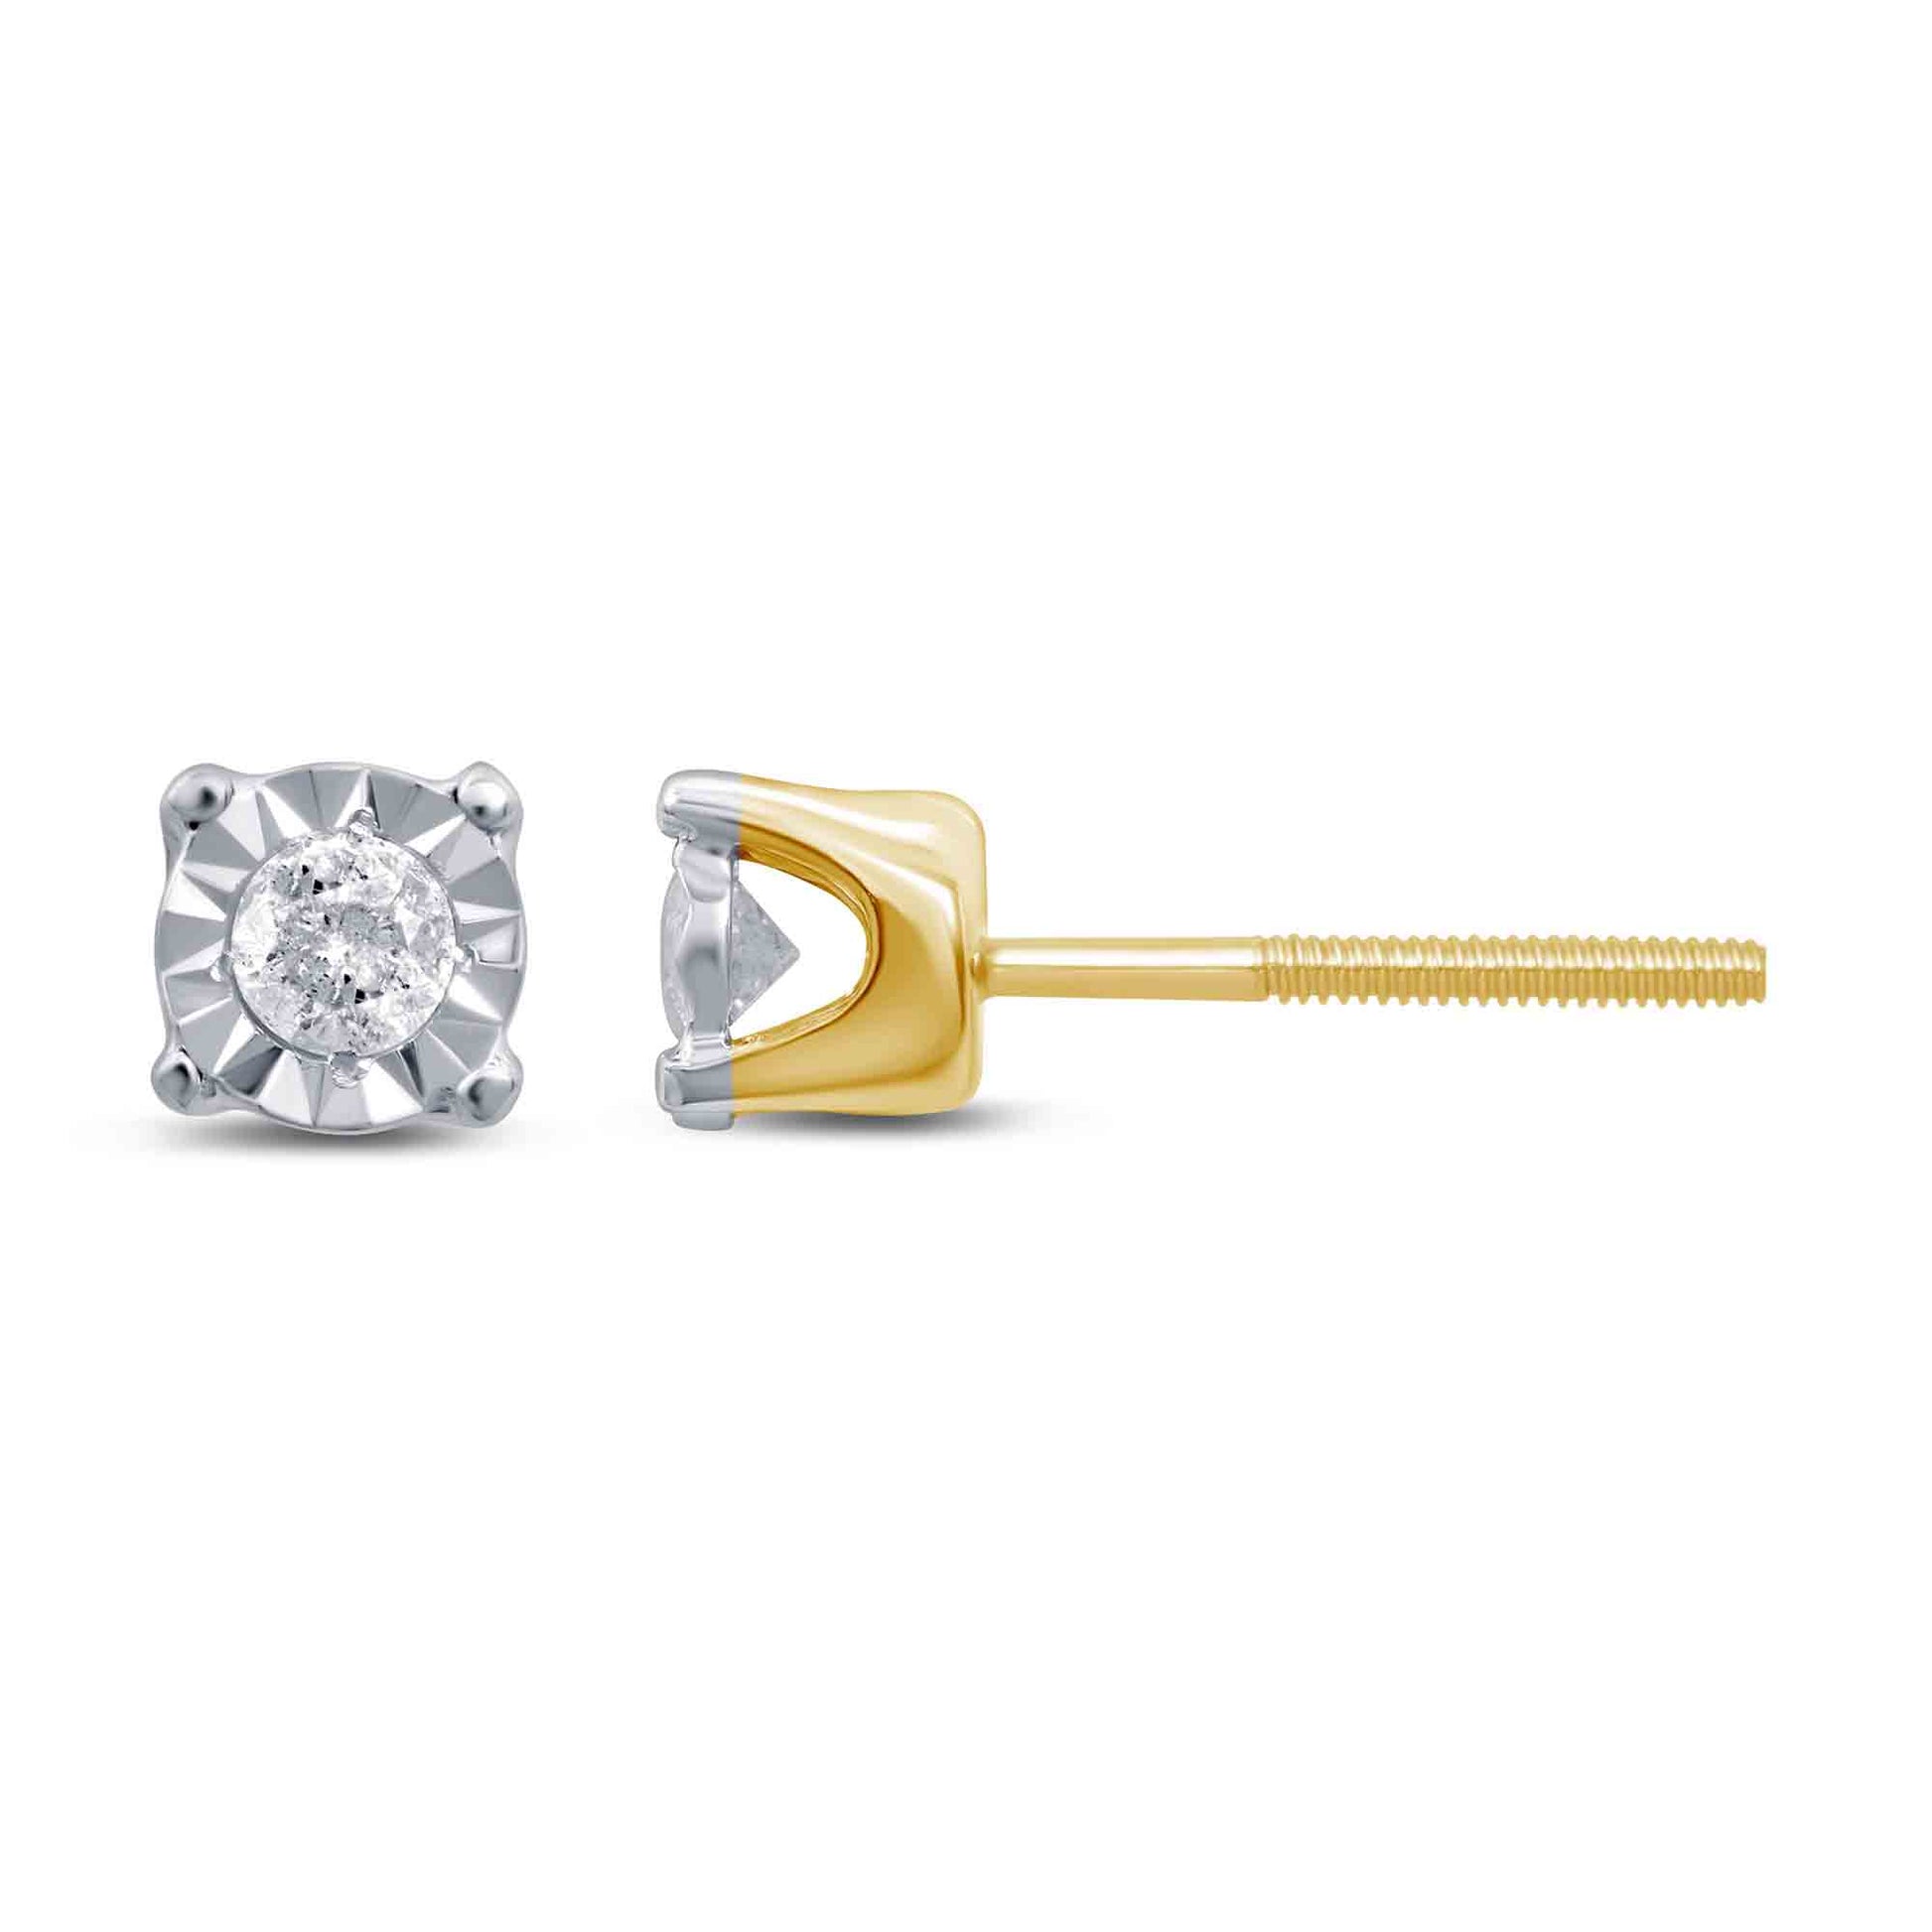 10 Karat Two-Tone (White and Yellow) Gold 0.68 Carat Diamond Square Earrings-0129052-WY